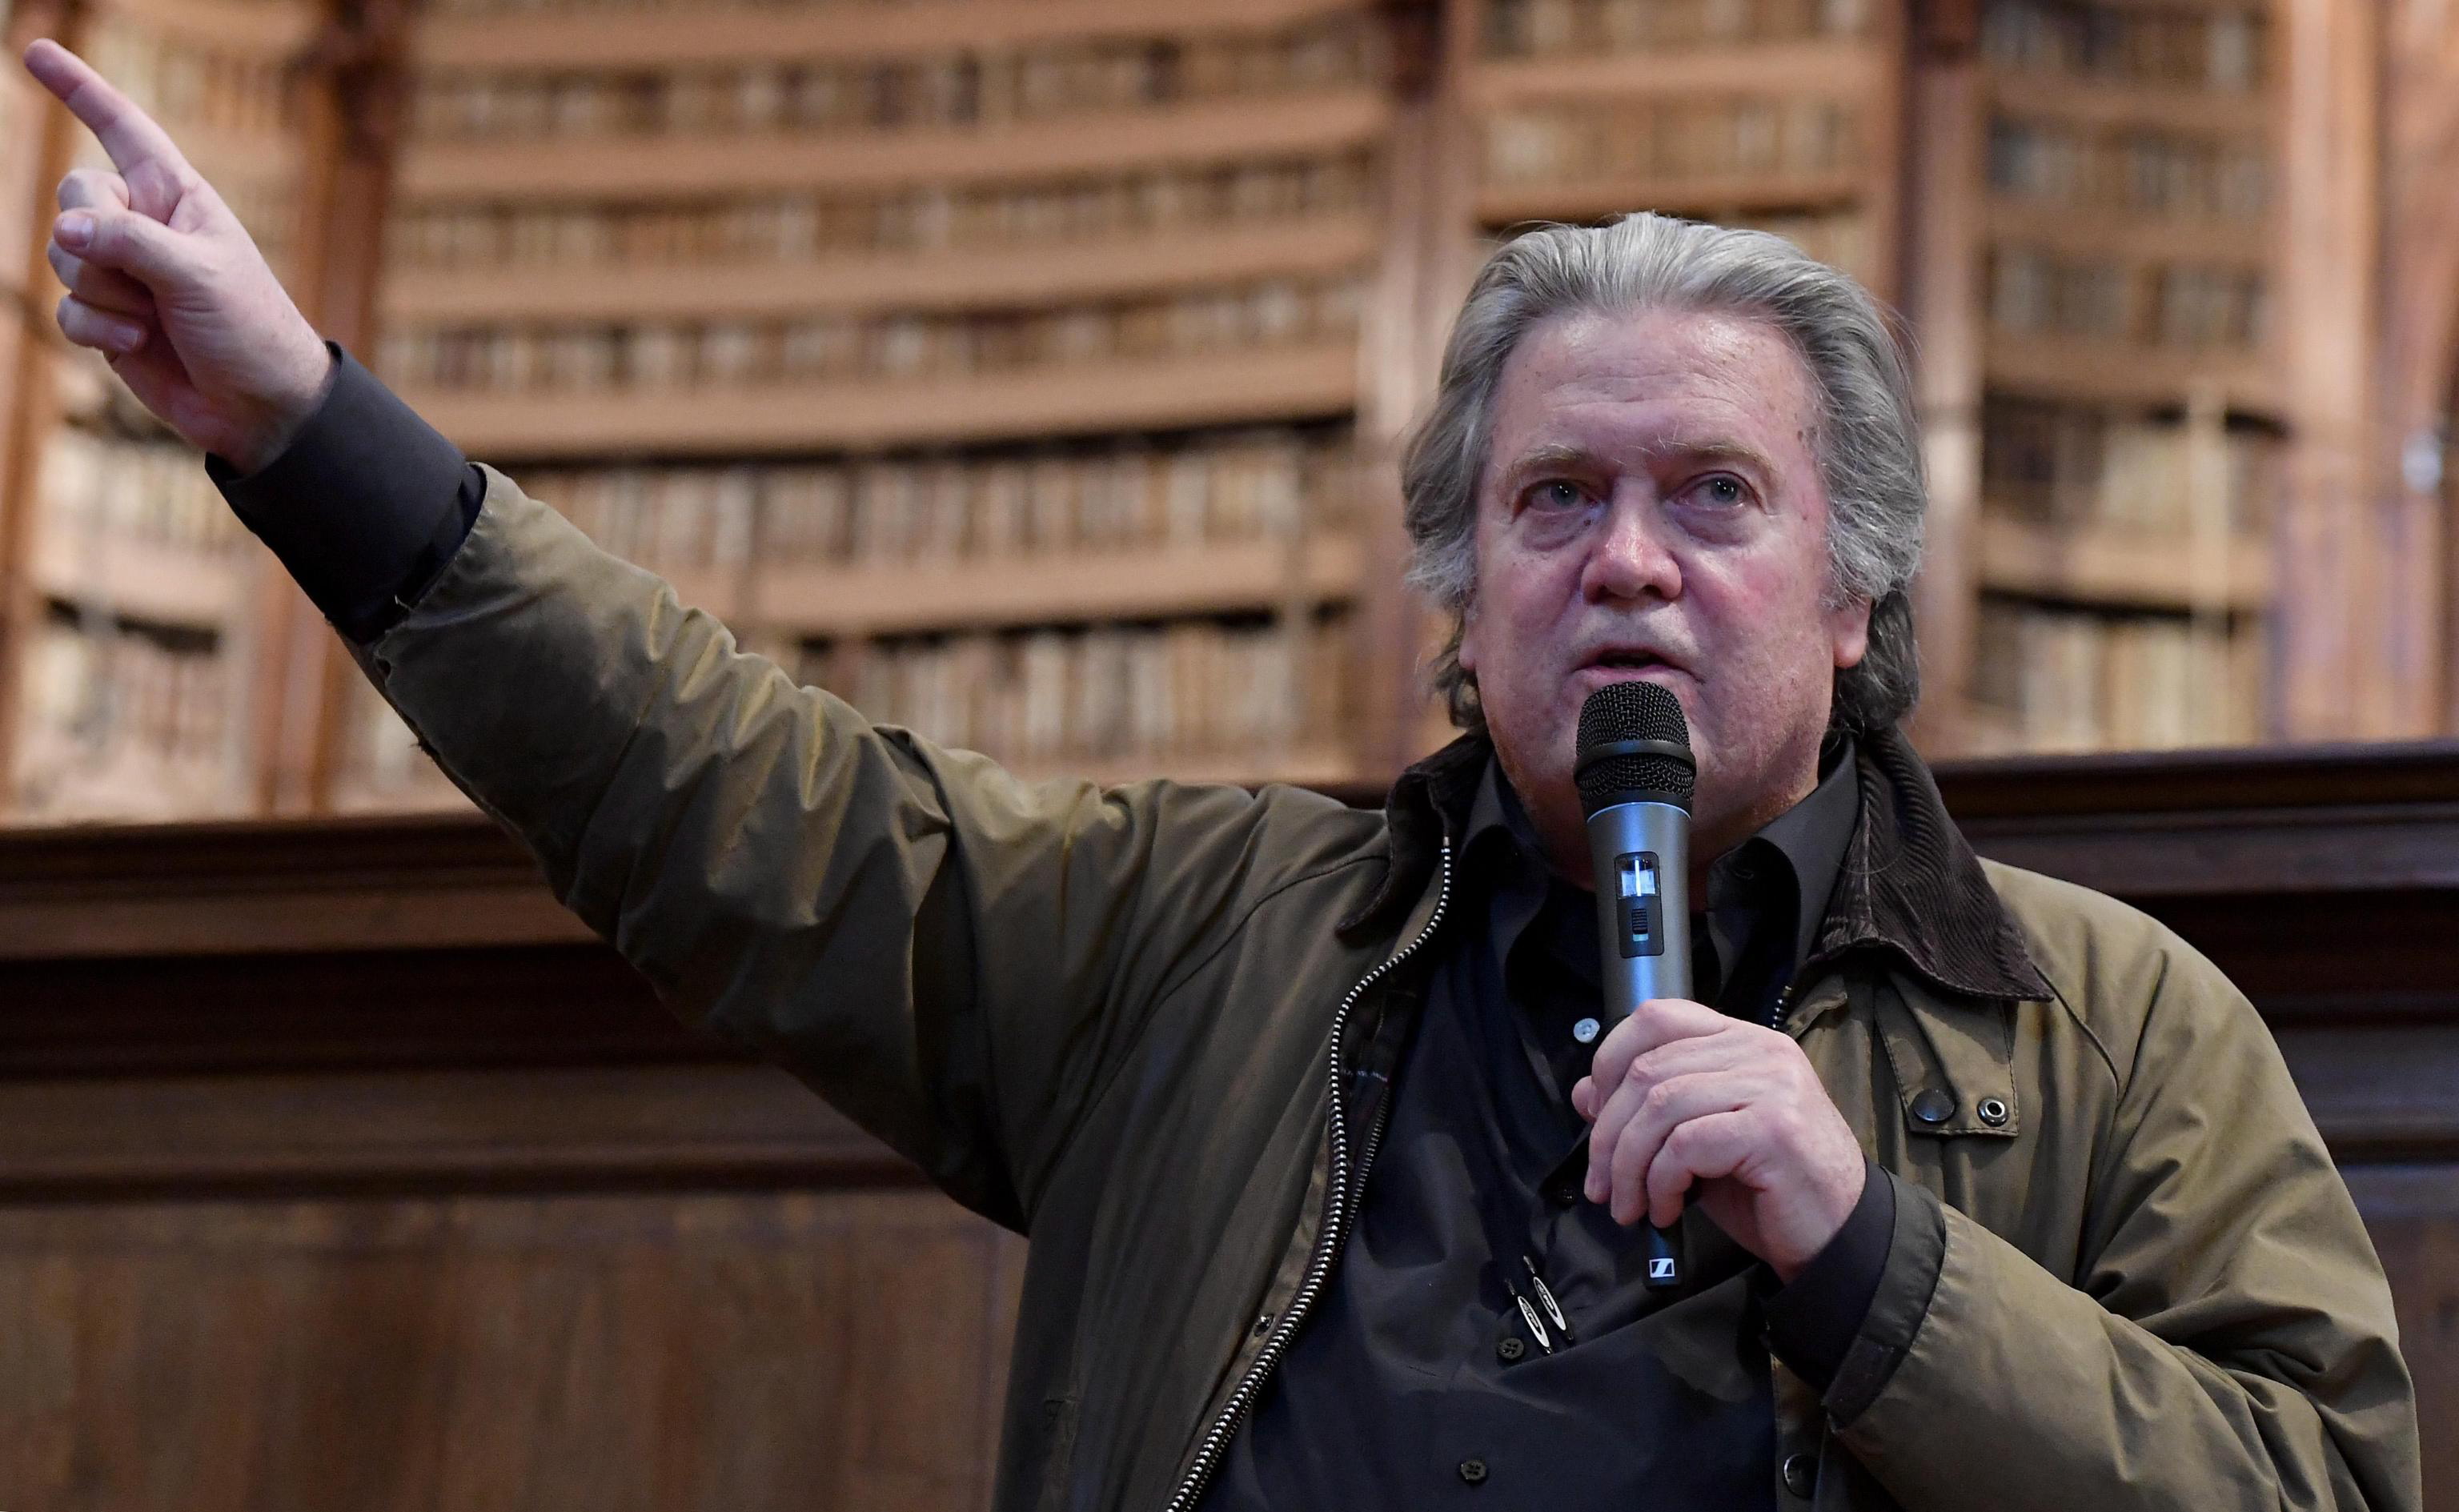 epa07453852 Former White House strategist Steve Bannon speaks as he holds The Daily Telegraph newspaper during a political meeting in Rome, Italy, 21 March 2019.  EPA/ETTORE FERRARI